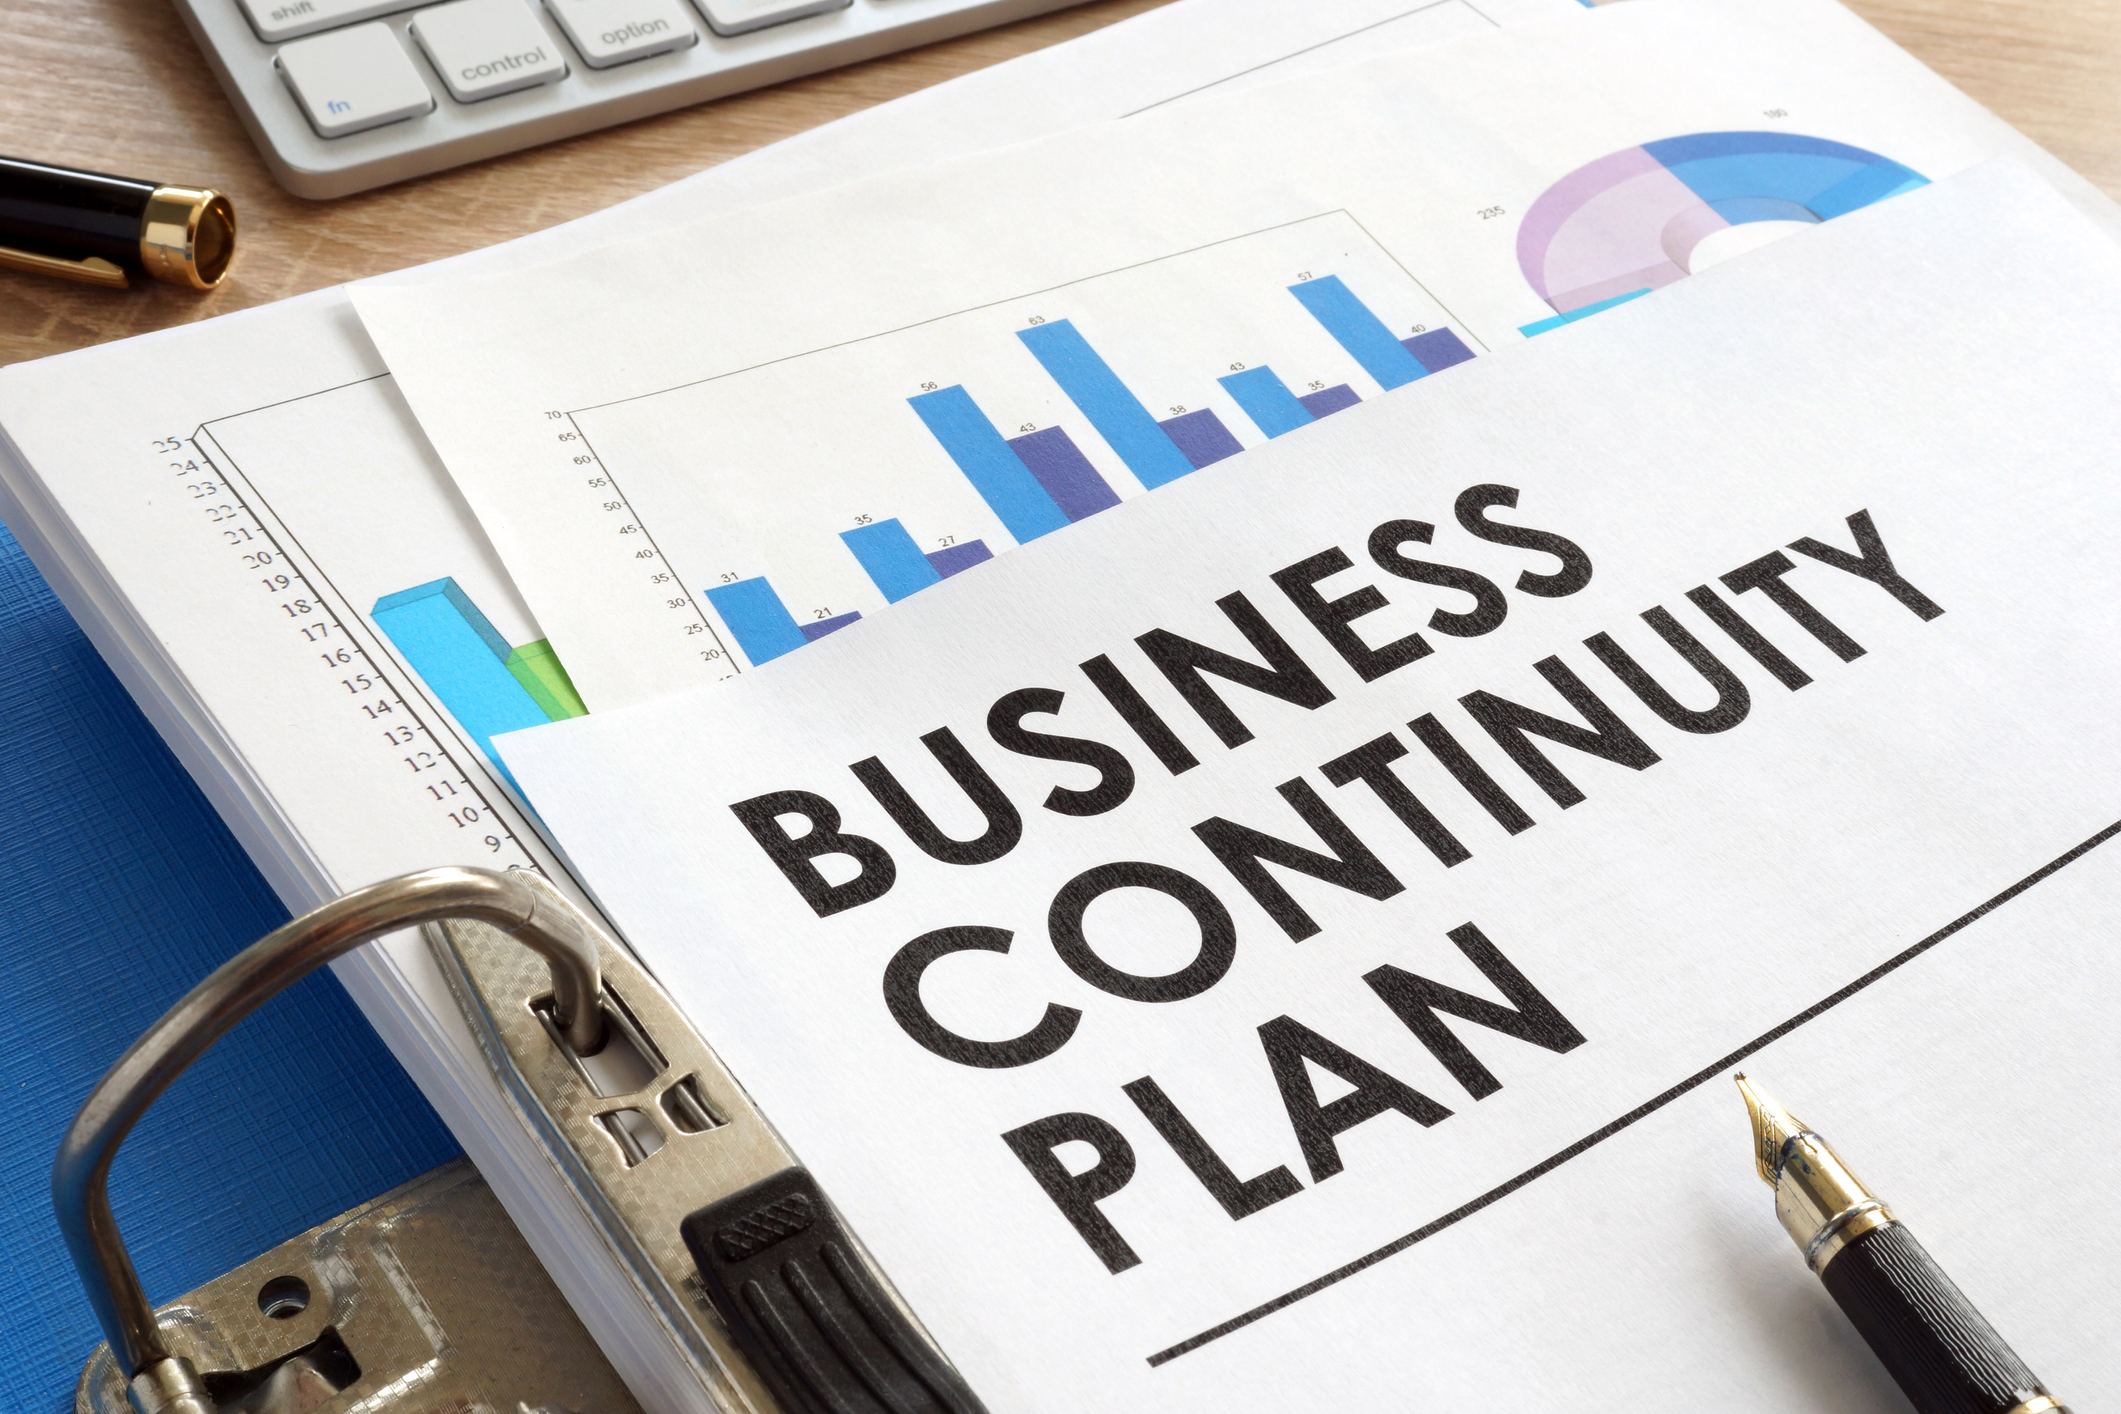 business continuity and contingency planning